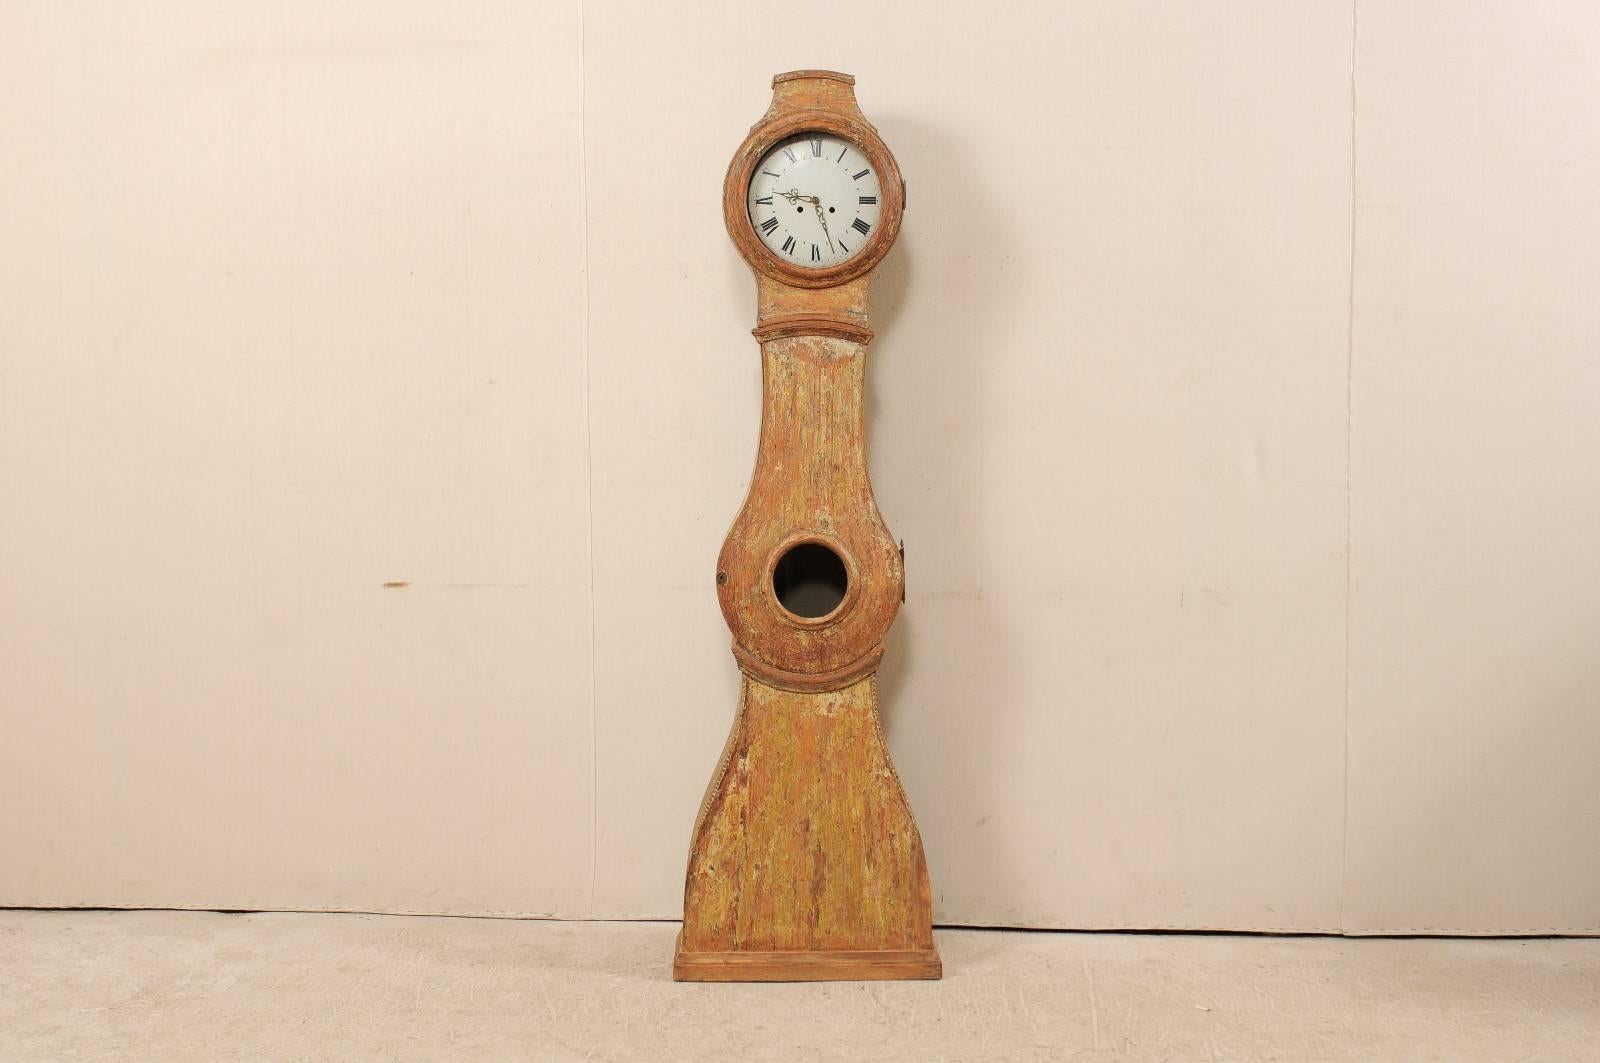 A 19th century painted wood Swedish clock. This Swedish clock from the 1820s features a round face, subtle crest and raindrop shaped body. This clock retains it's original metal face, hands and movement.  There are trim accents about the neck and